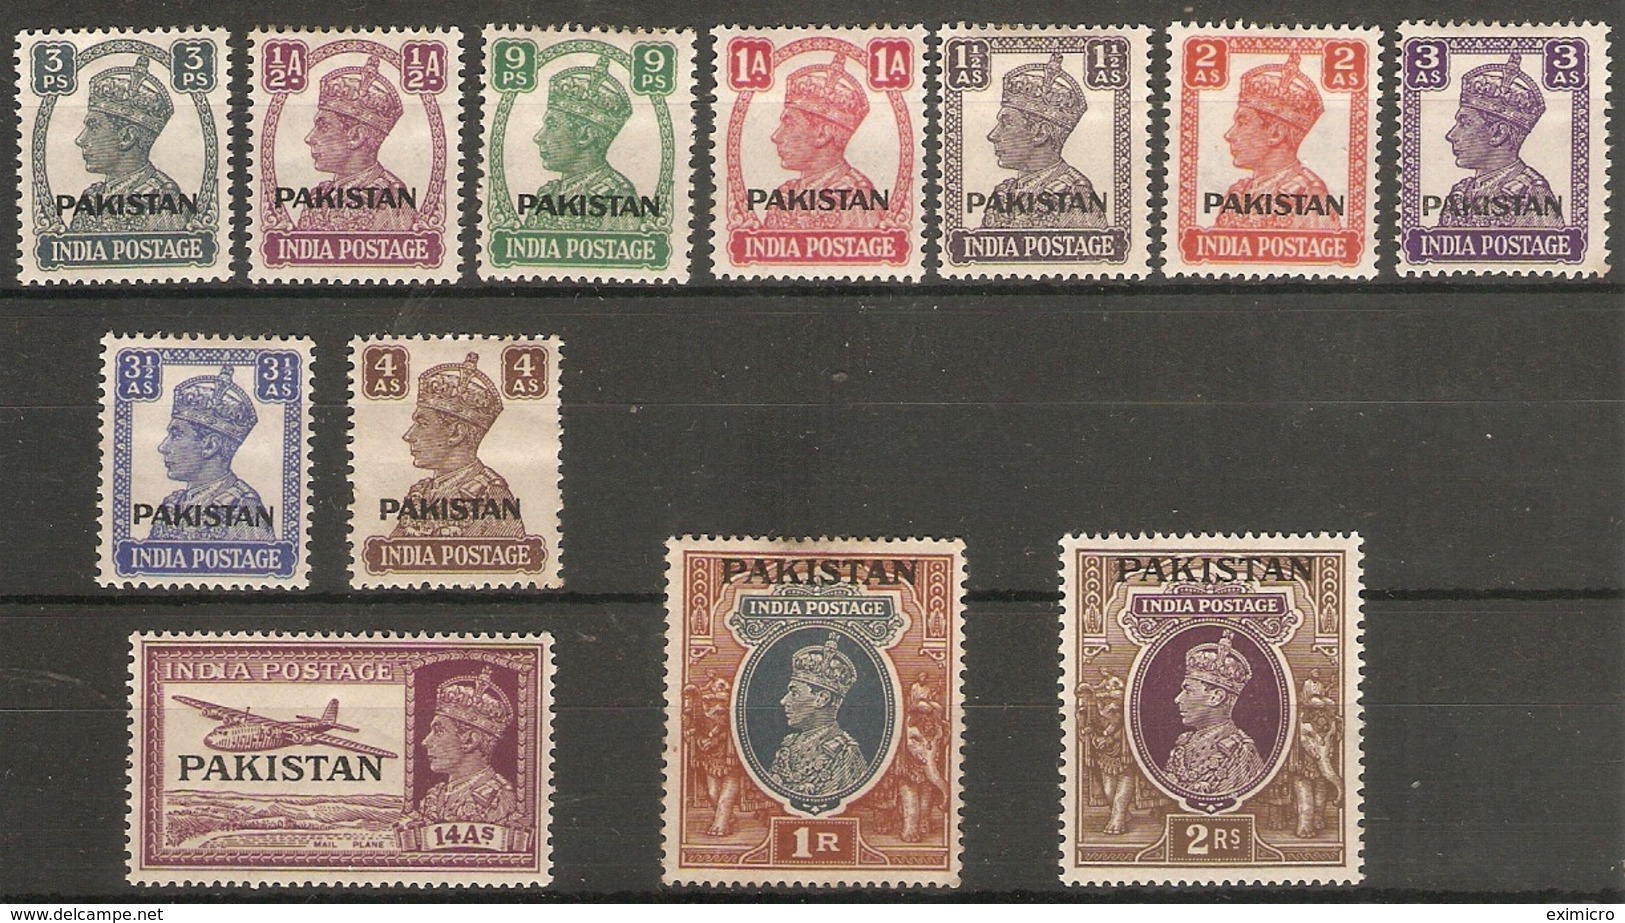 PAKISTAN 1947 VALUES TO 2R BETWEEN SG 1 And SG 15 MOUNTED MINT/ UNMOUNTED MINT Cat £21+ - Pakistan